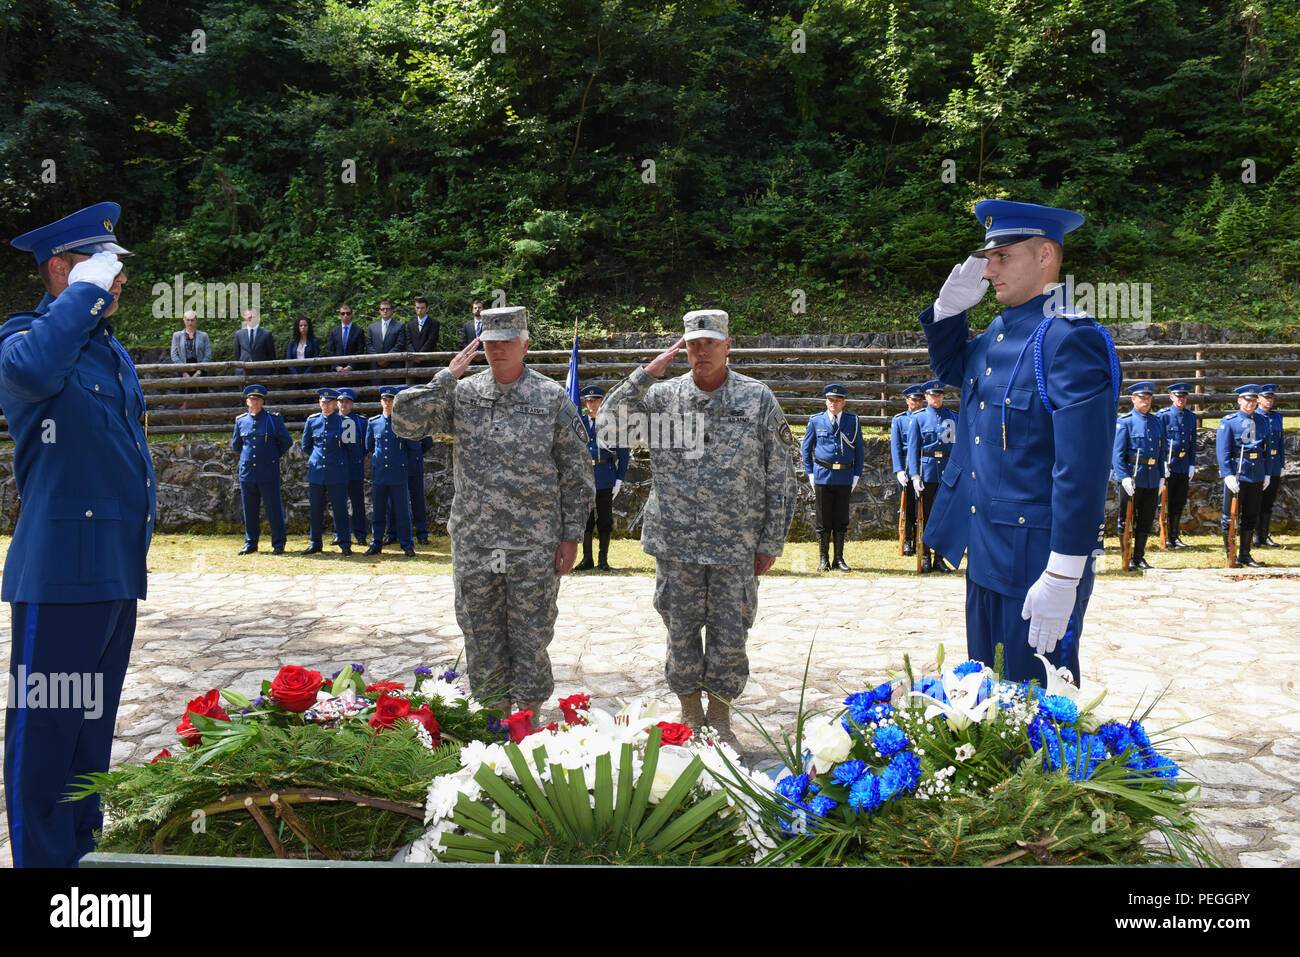 U.S. Army Brig. Gen. Giselle Wilz, NATO Headquarters Sarajevo commander, and Command Sgt. Maj. Harley Schwind, NHQSa command senior enlisted leader, paid respects during a memorial ceremony at Mount Igman in Bosnia and Herzegovina Aug. 19, 2015. On Aug. 19, 1995, three American diplomats and a French soldier died during an automobile accident while traveling on Igman while on a mission to negotiate a U.S. proposal for peace in Bosnia. The diplomats were Ambassadors Robert C. Frasure and Joseph Kruzel, and U.S. Air Force Col. Sam Nelson Drew; the French soldier was Stephan Reault. (U.S. Air For Stock Photo